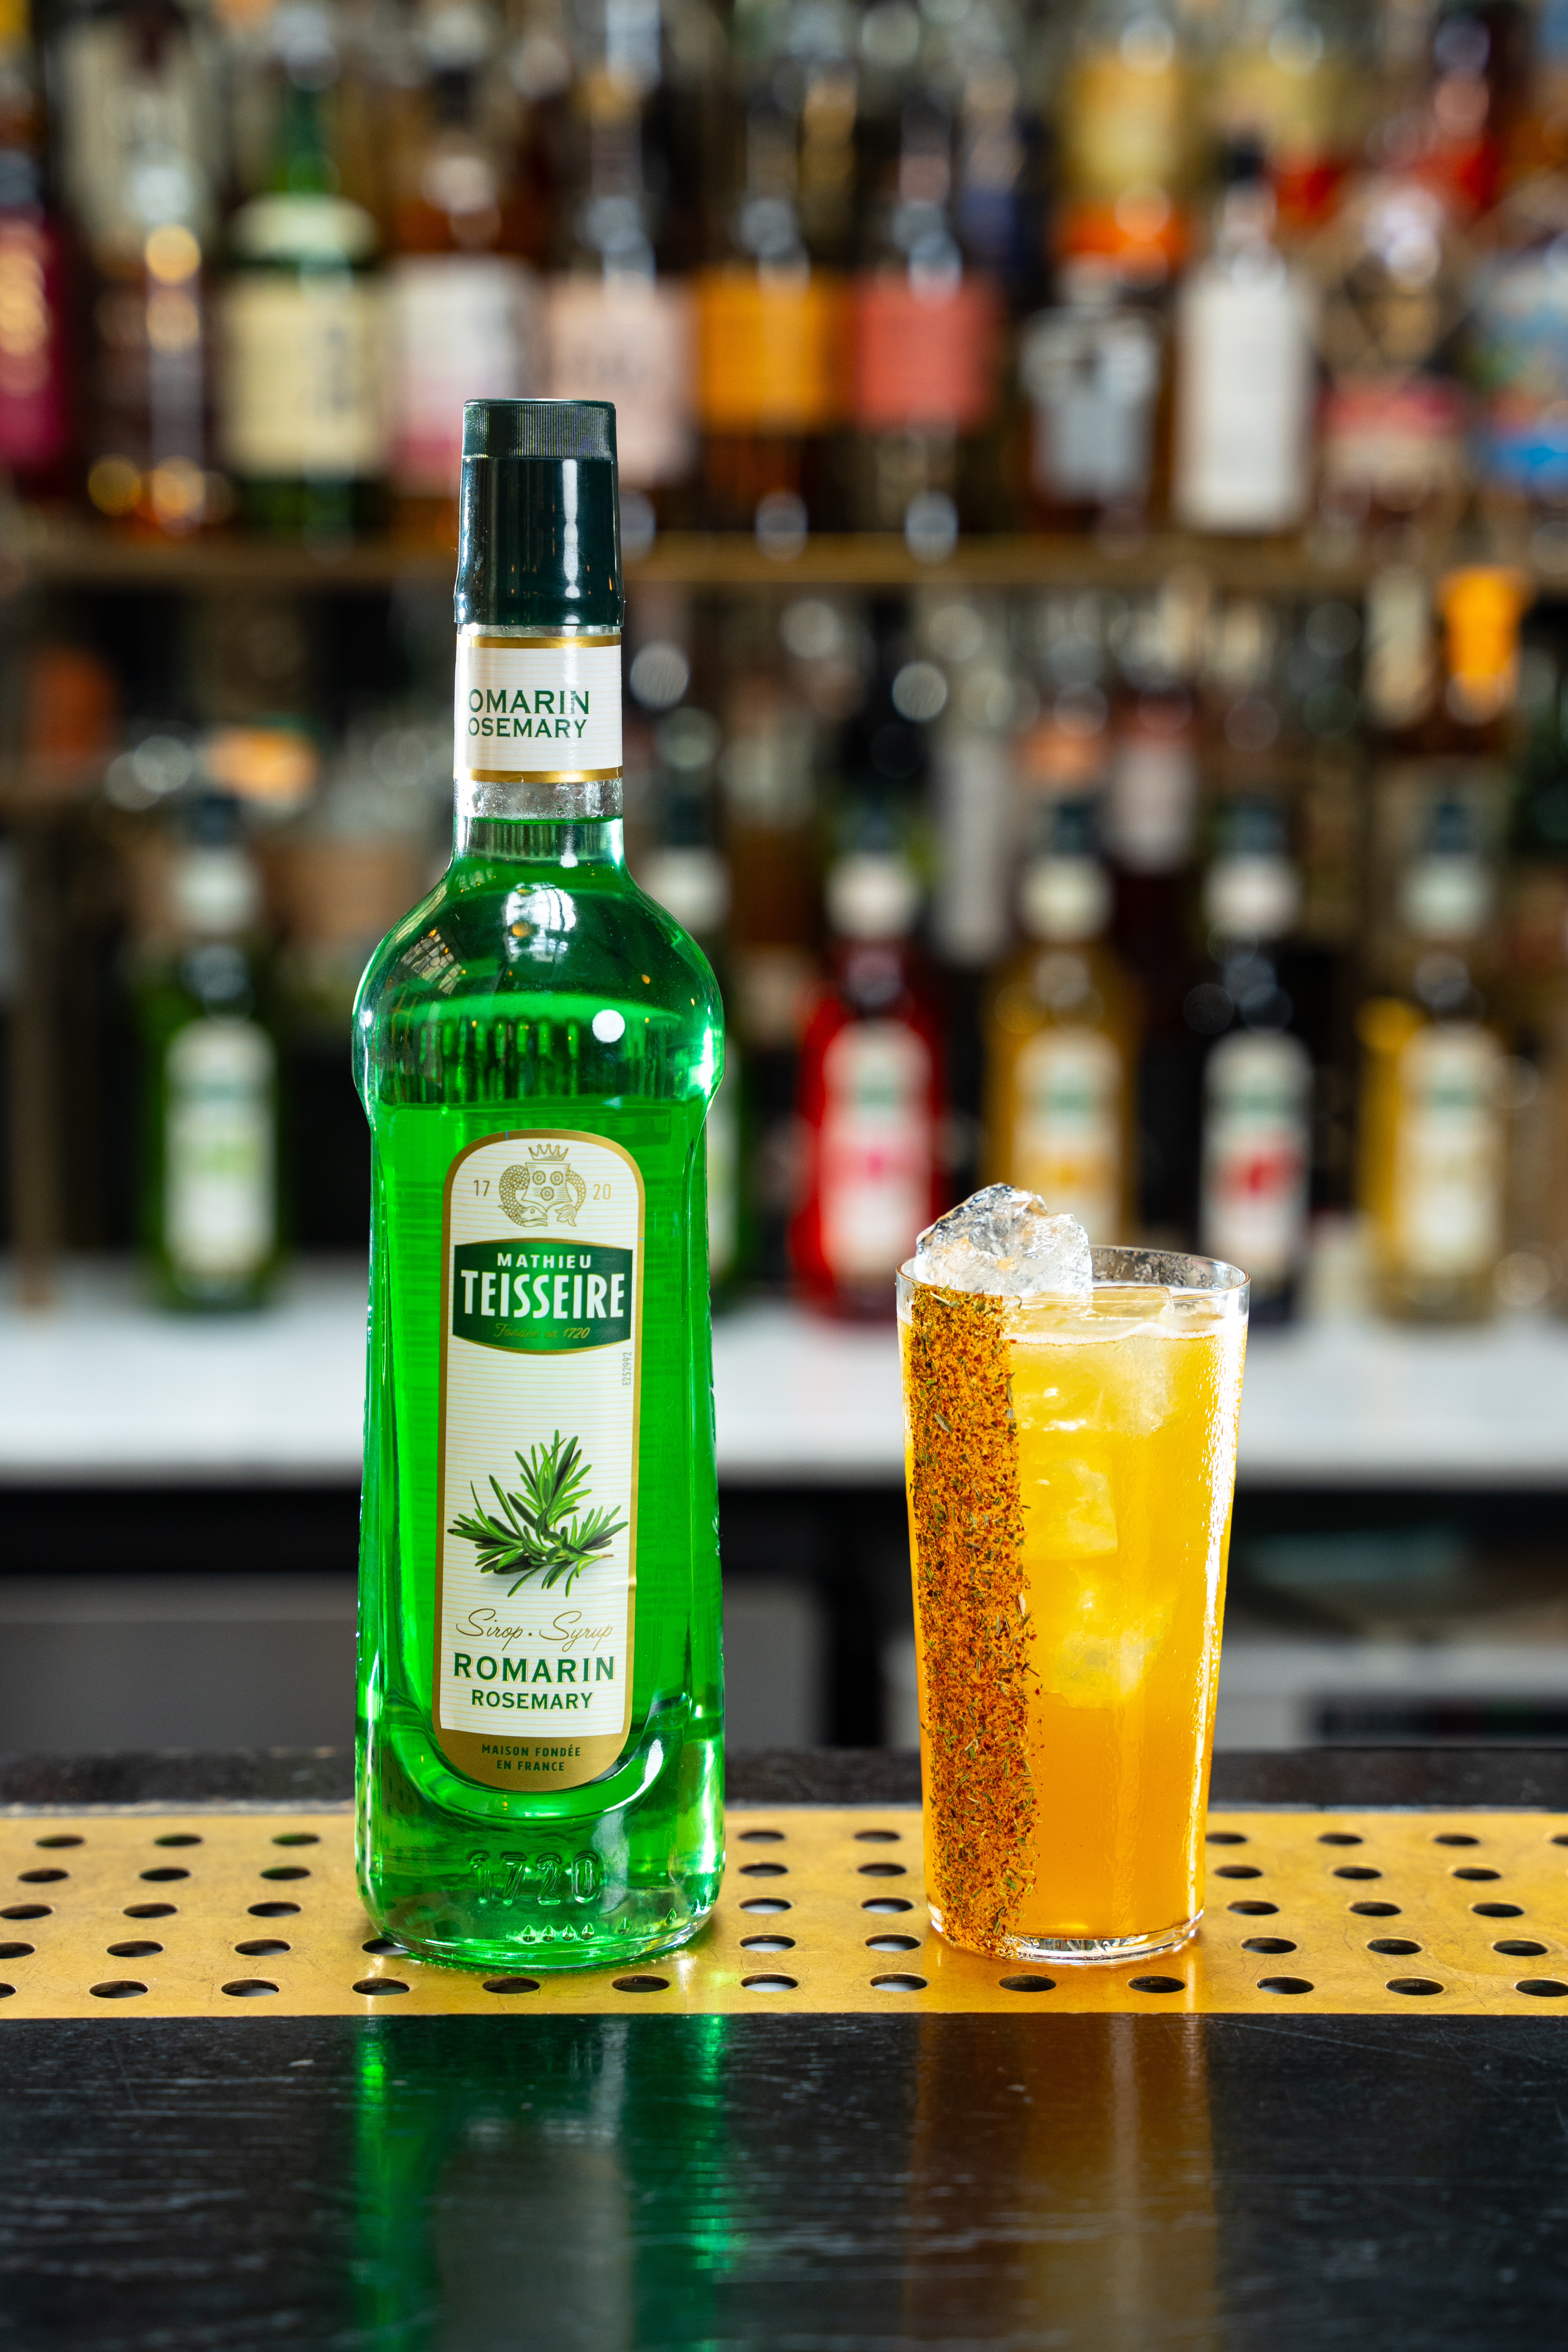 A tumbler glass is on a bar surface, placed next to a bottle of Mathieu Teisseire rosemary syrup. The glass contains a yellow drink, and the edge of the glass is lined with rosemary and hot pepper. 